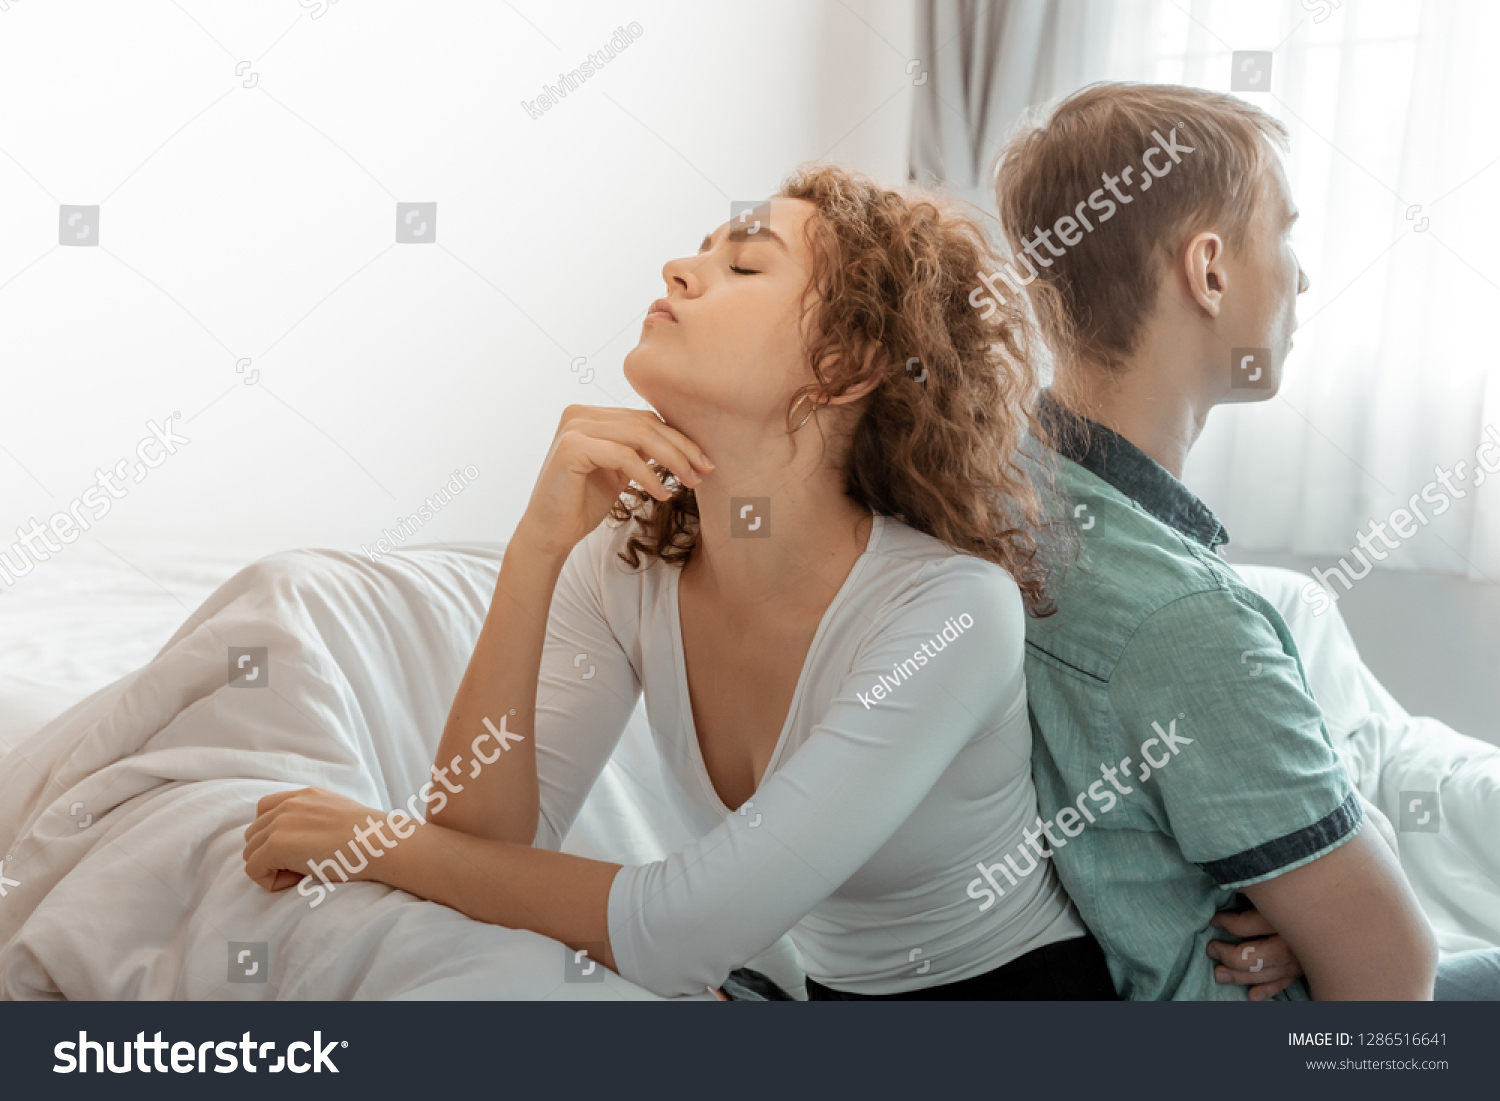 Unhappy young man and woman sitting separately on couch, bad relationships #1286516641